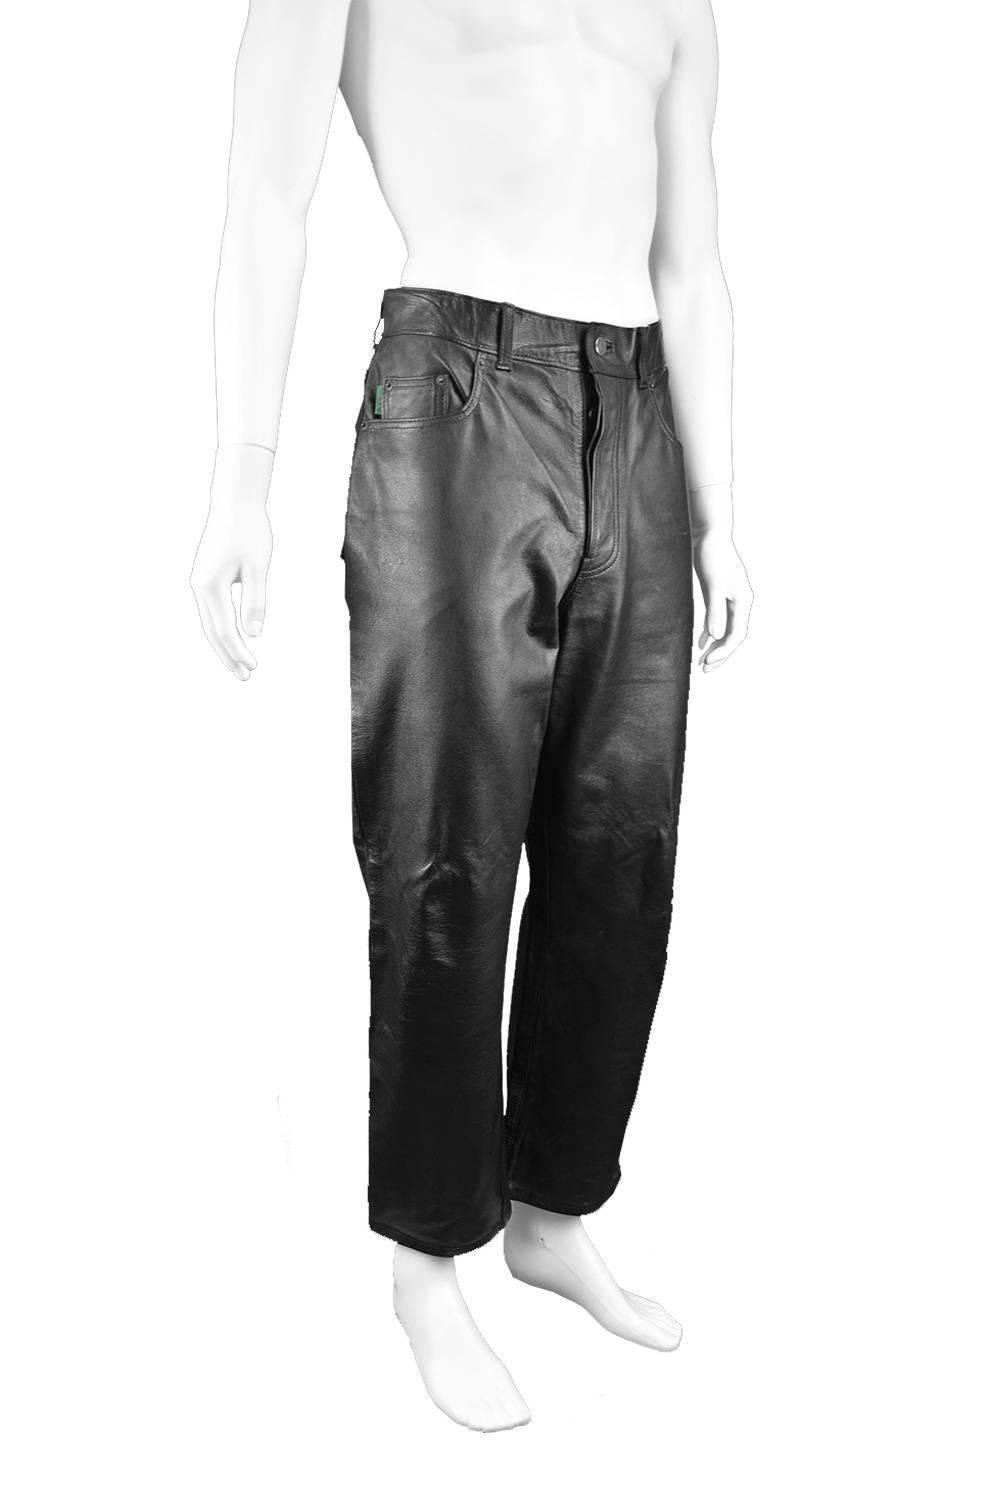 Paul Smith Men's Vintage Black Real Leather Straight Leg Pants, 1990s For Sale 2